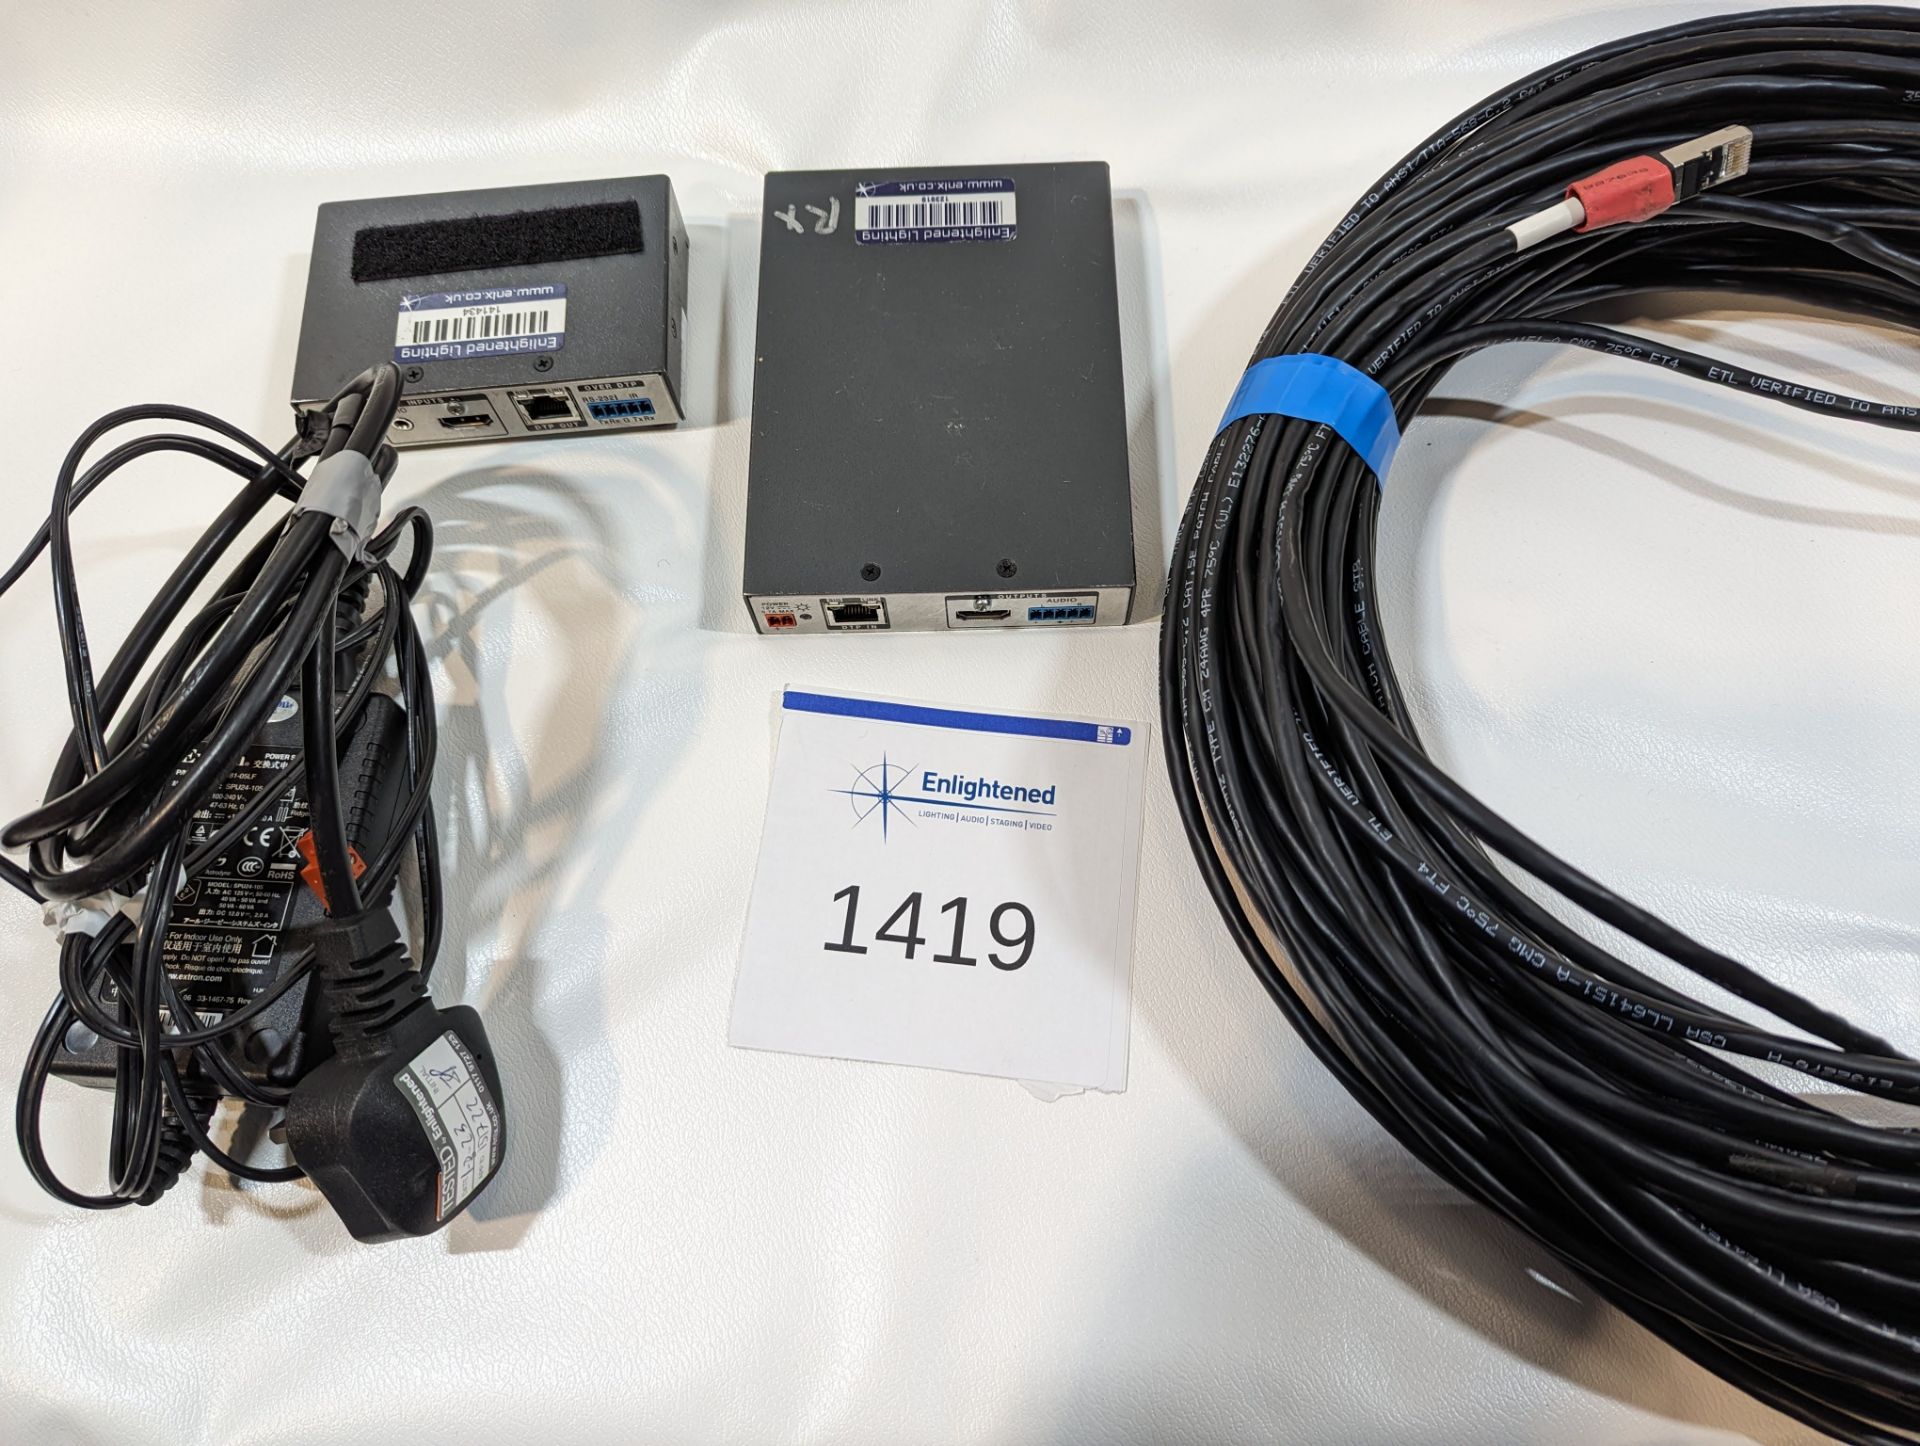 Extron hdmi over cat 5 kits inc 50m cat5 - Image 3 of 3